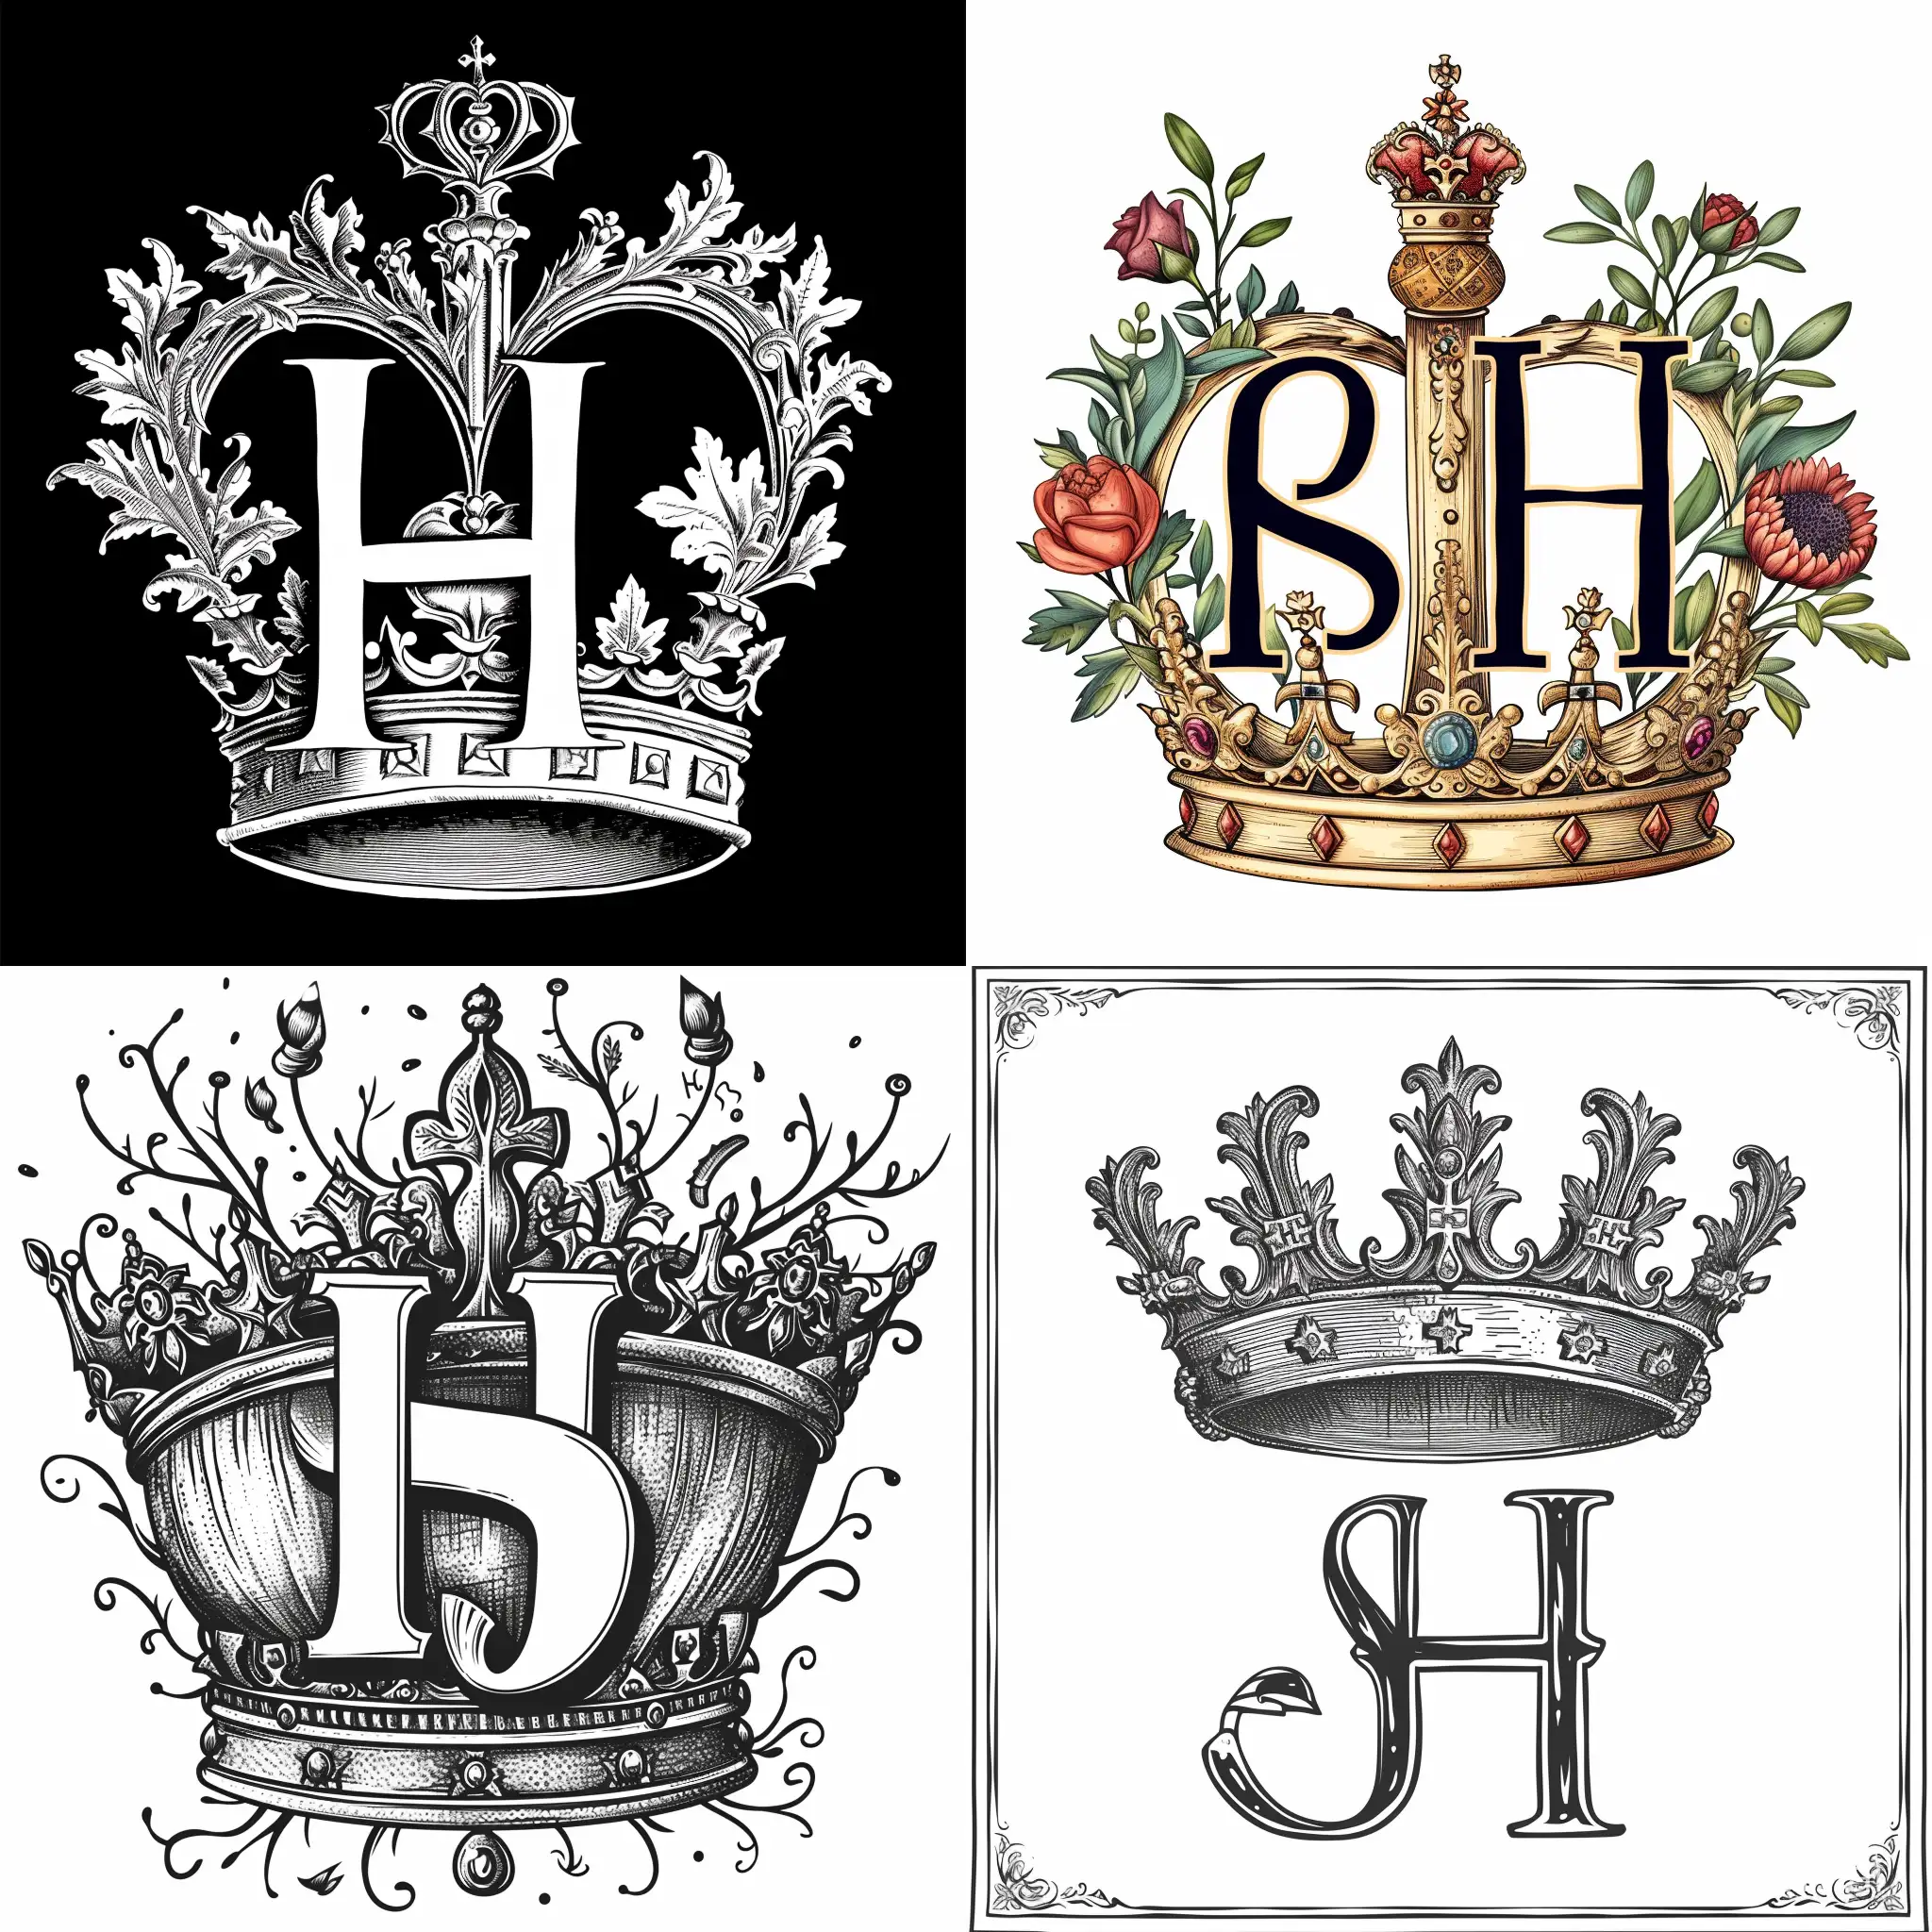 Intricate-Letter-Sh-Design-Adorning-a-Kings-Crown